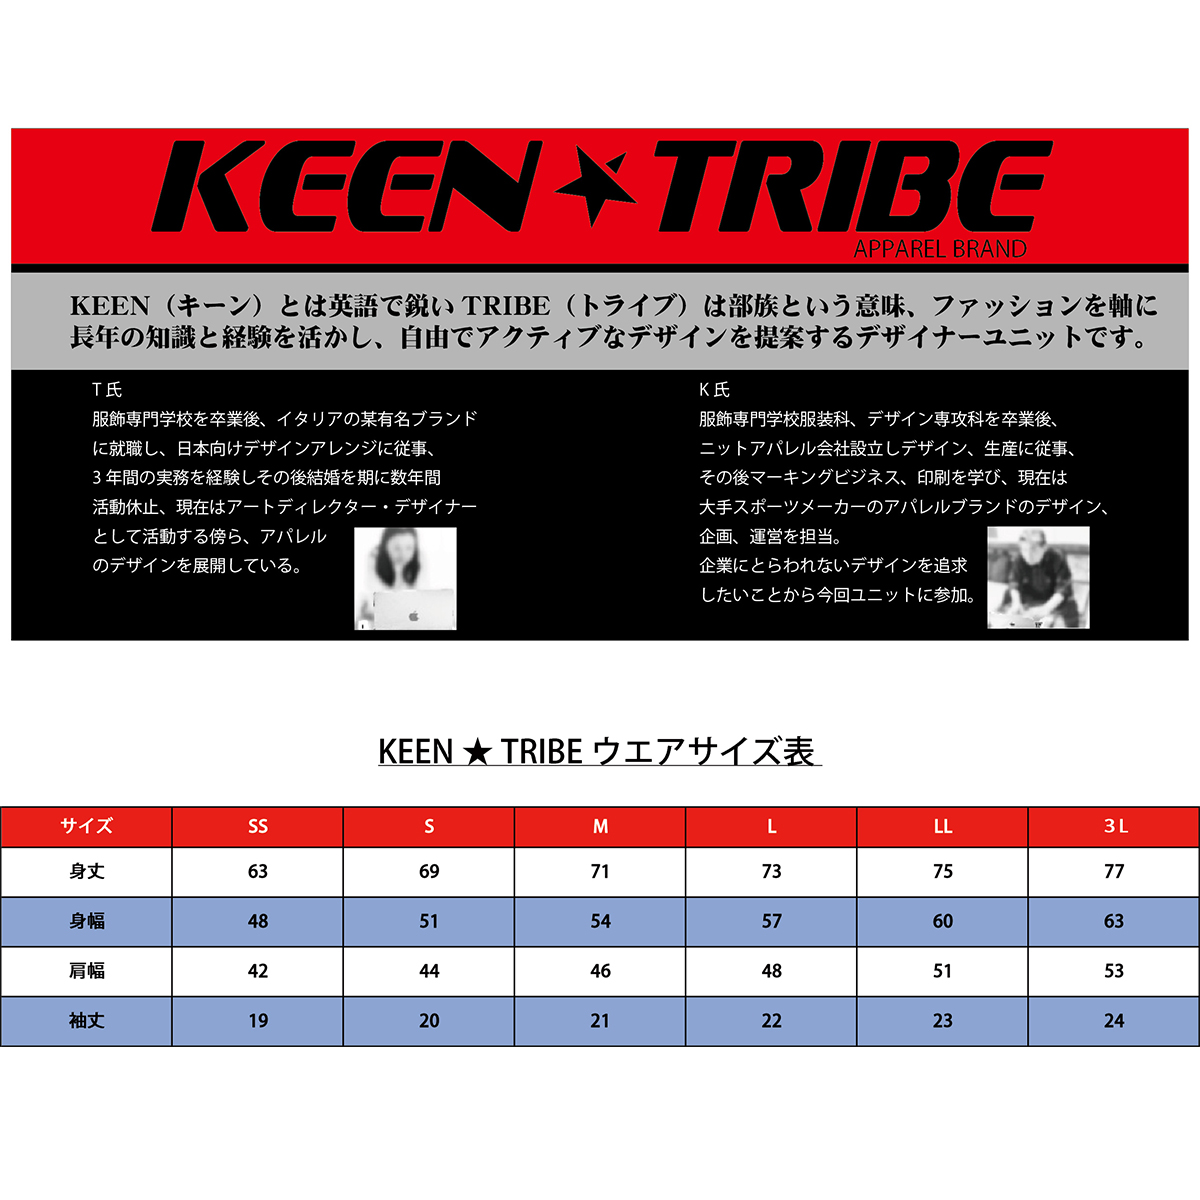 KEEN ★ TRIBE　KT-2(受注生産)